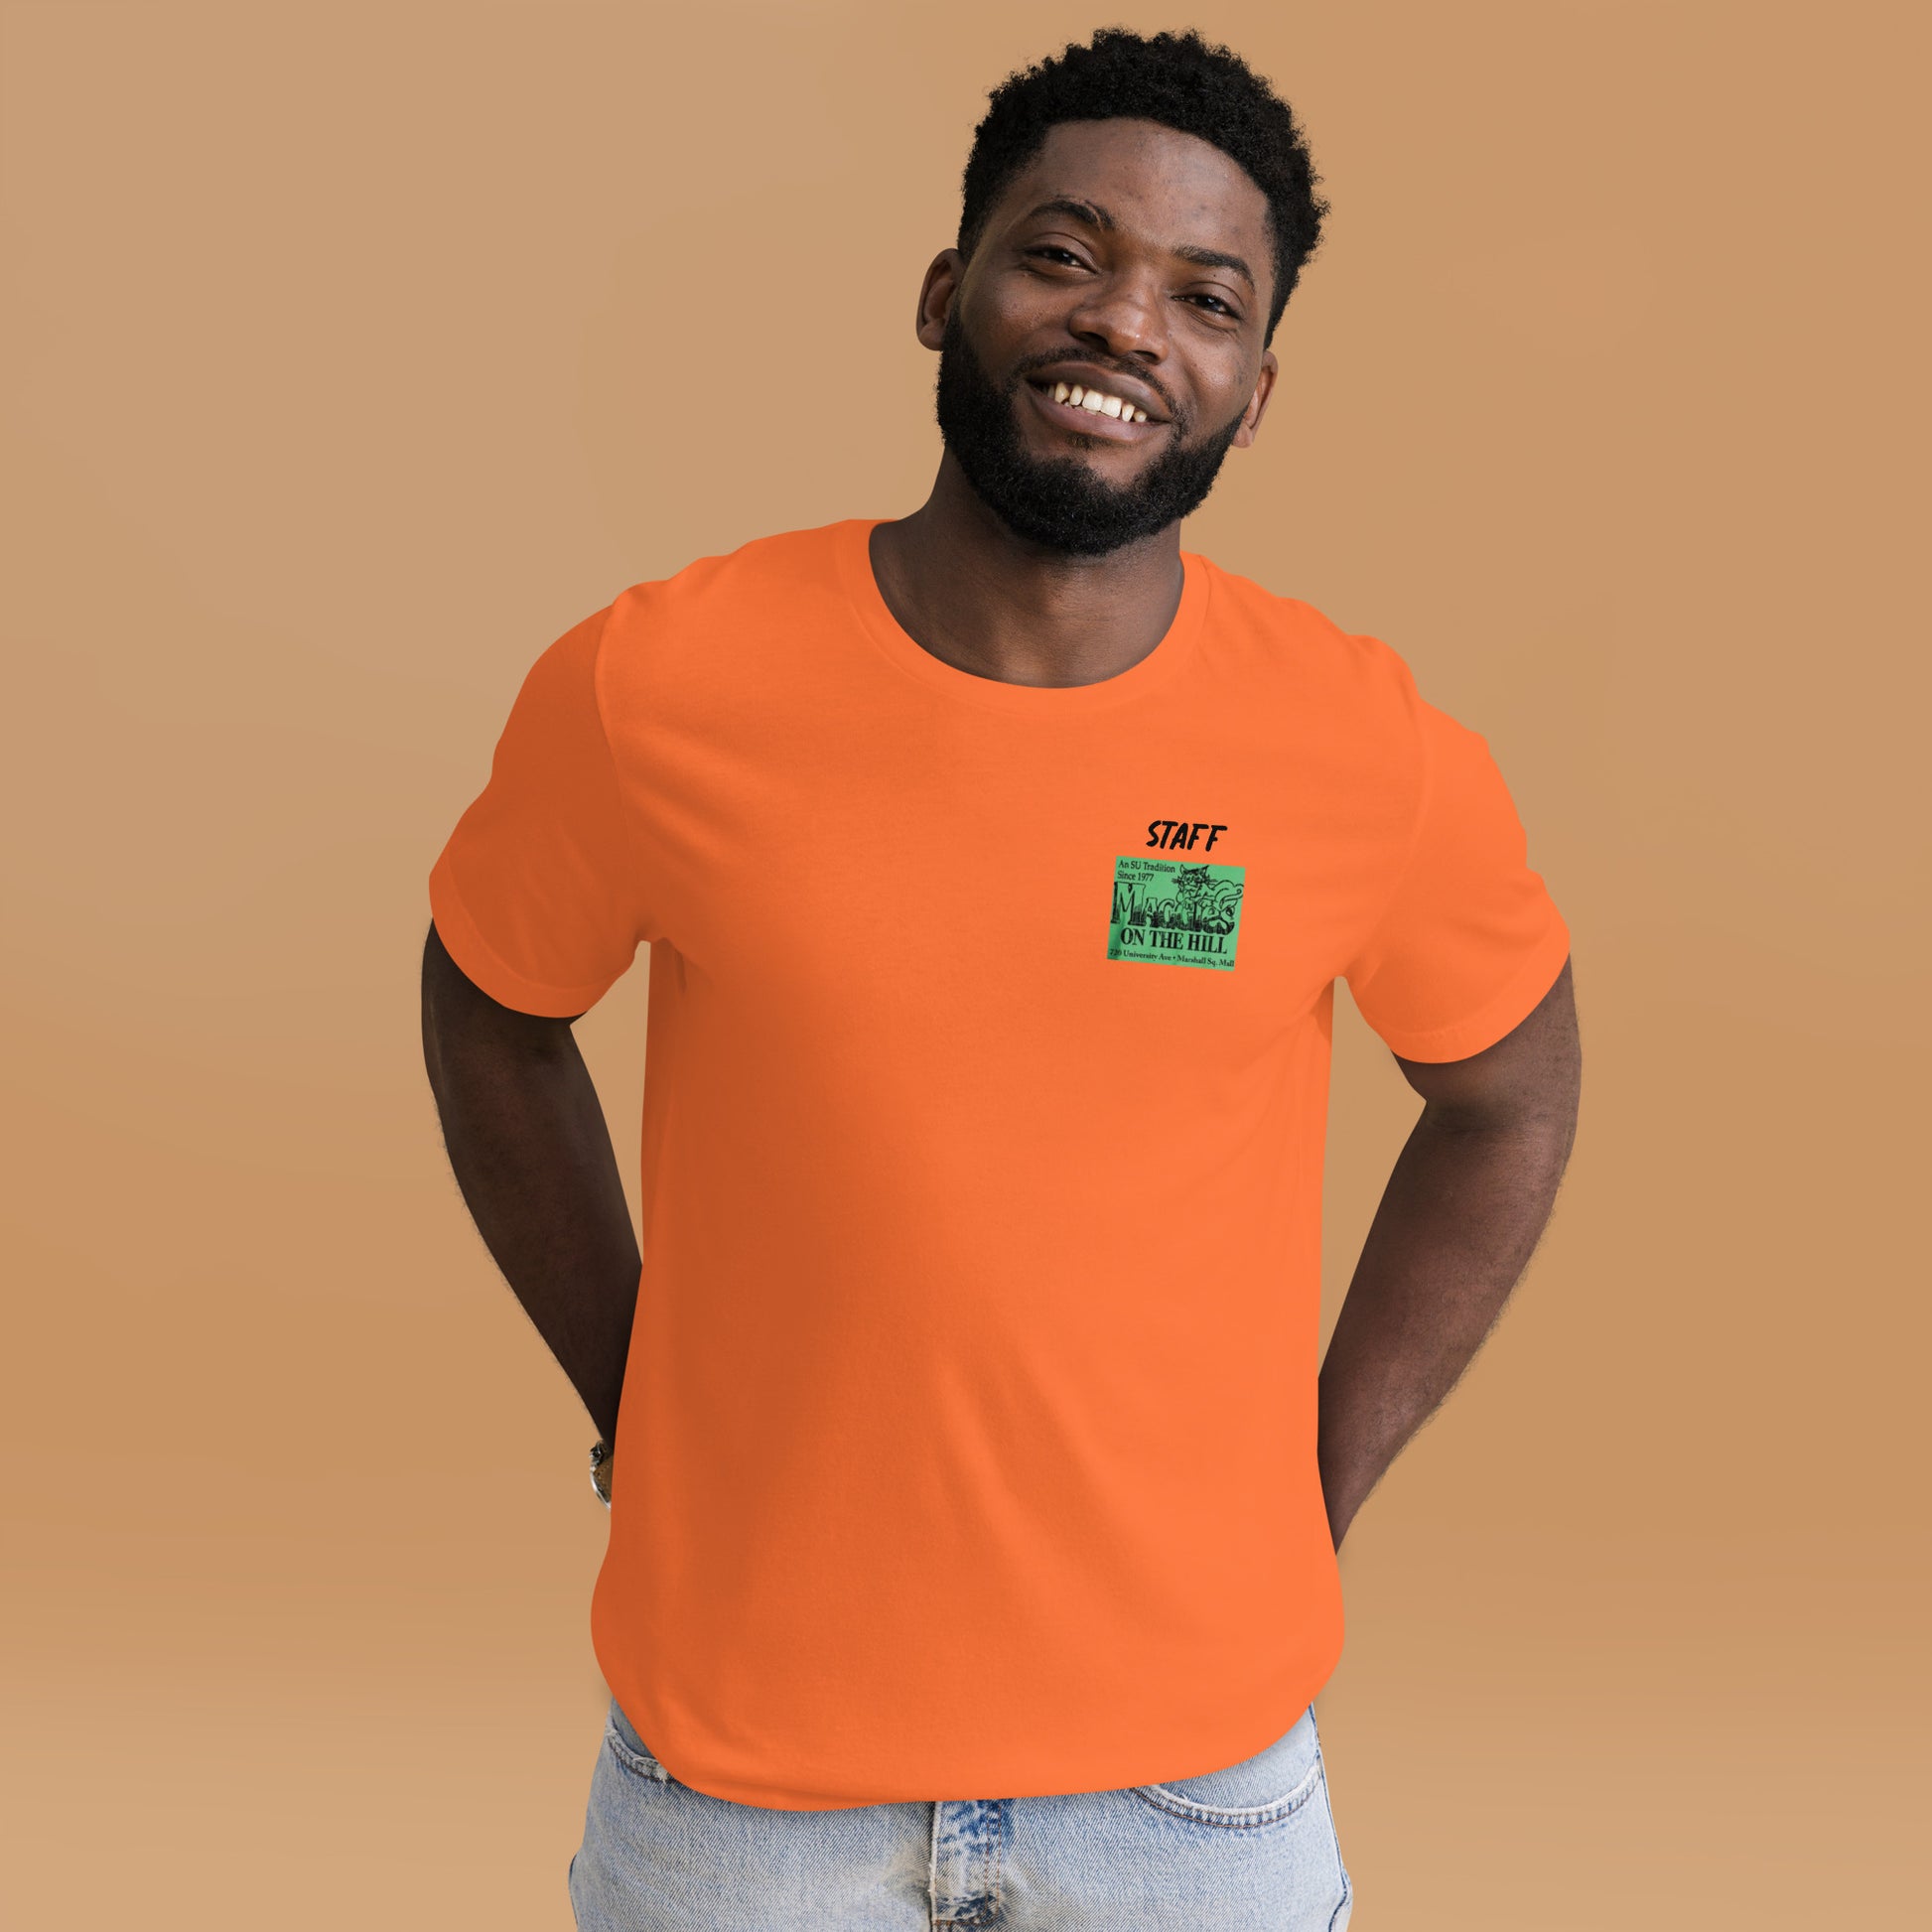 Orange unisex tee that says 'Maggie's on the Hill - Staff' 